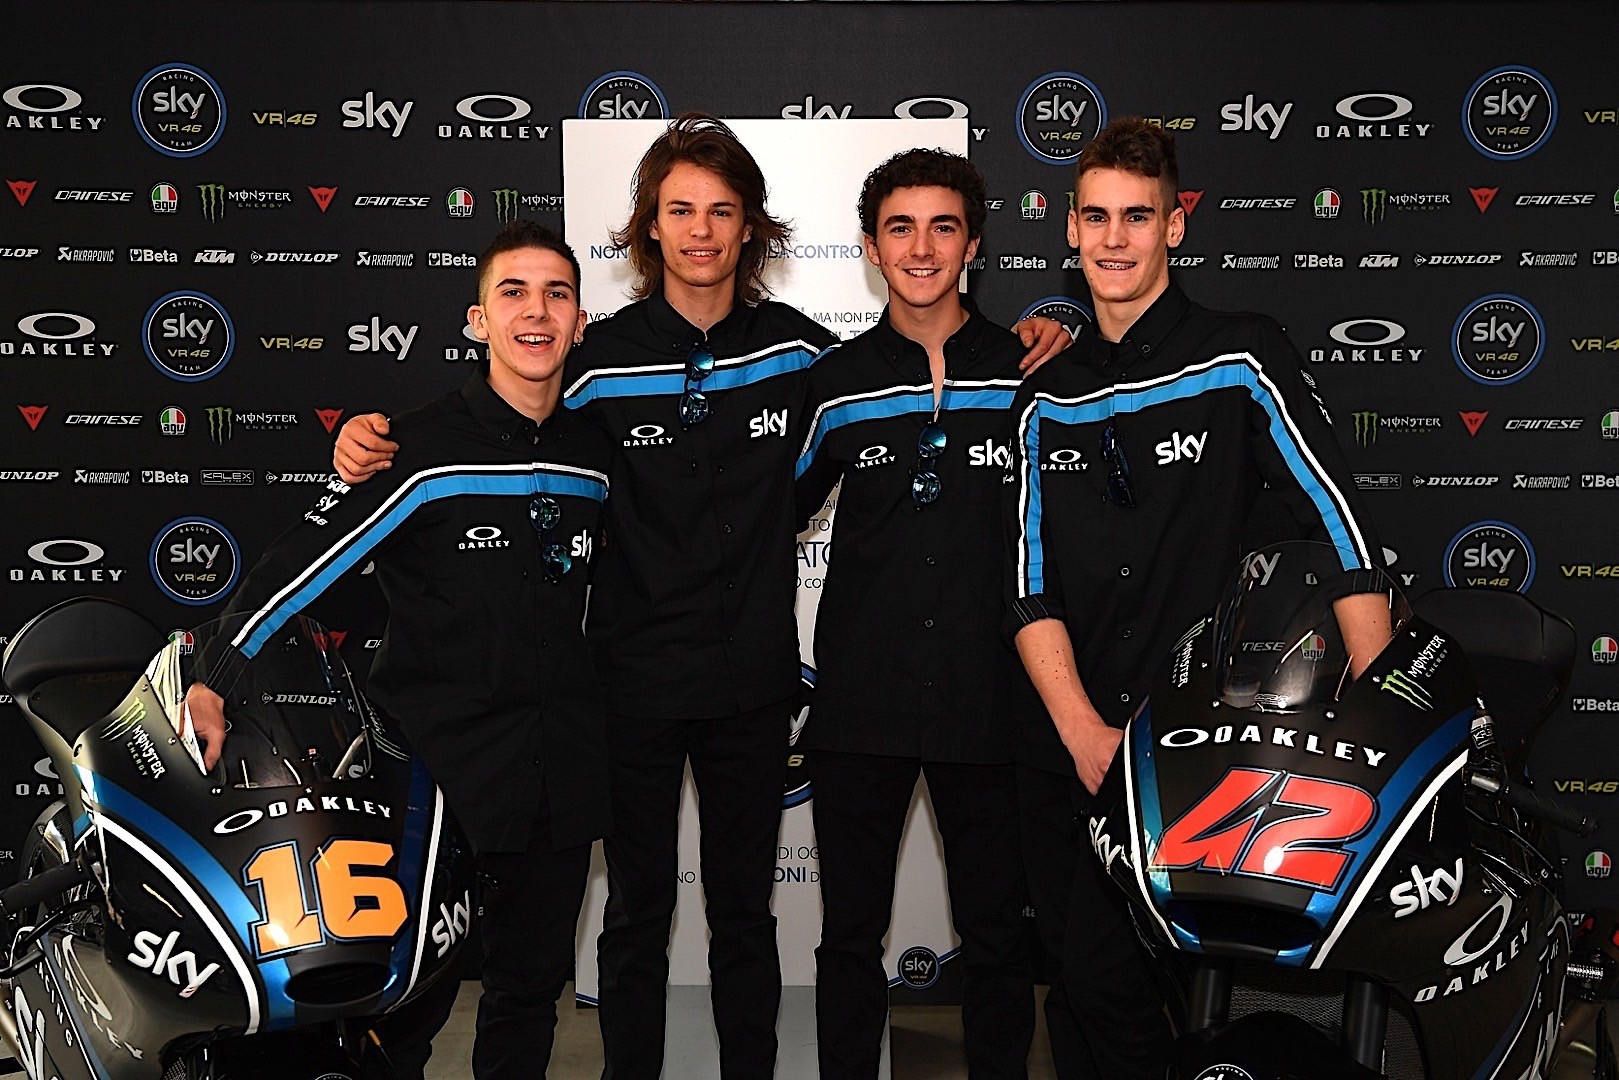 dainese and agv sign with sky racing team vr46 for 2017 1